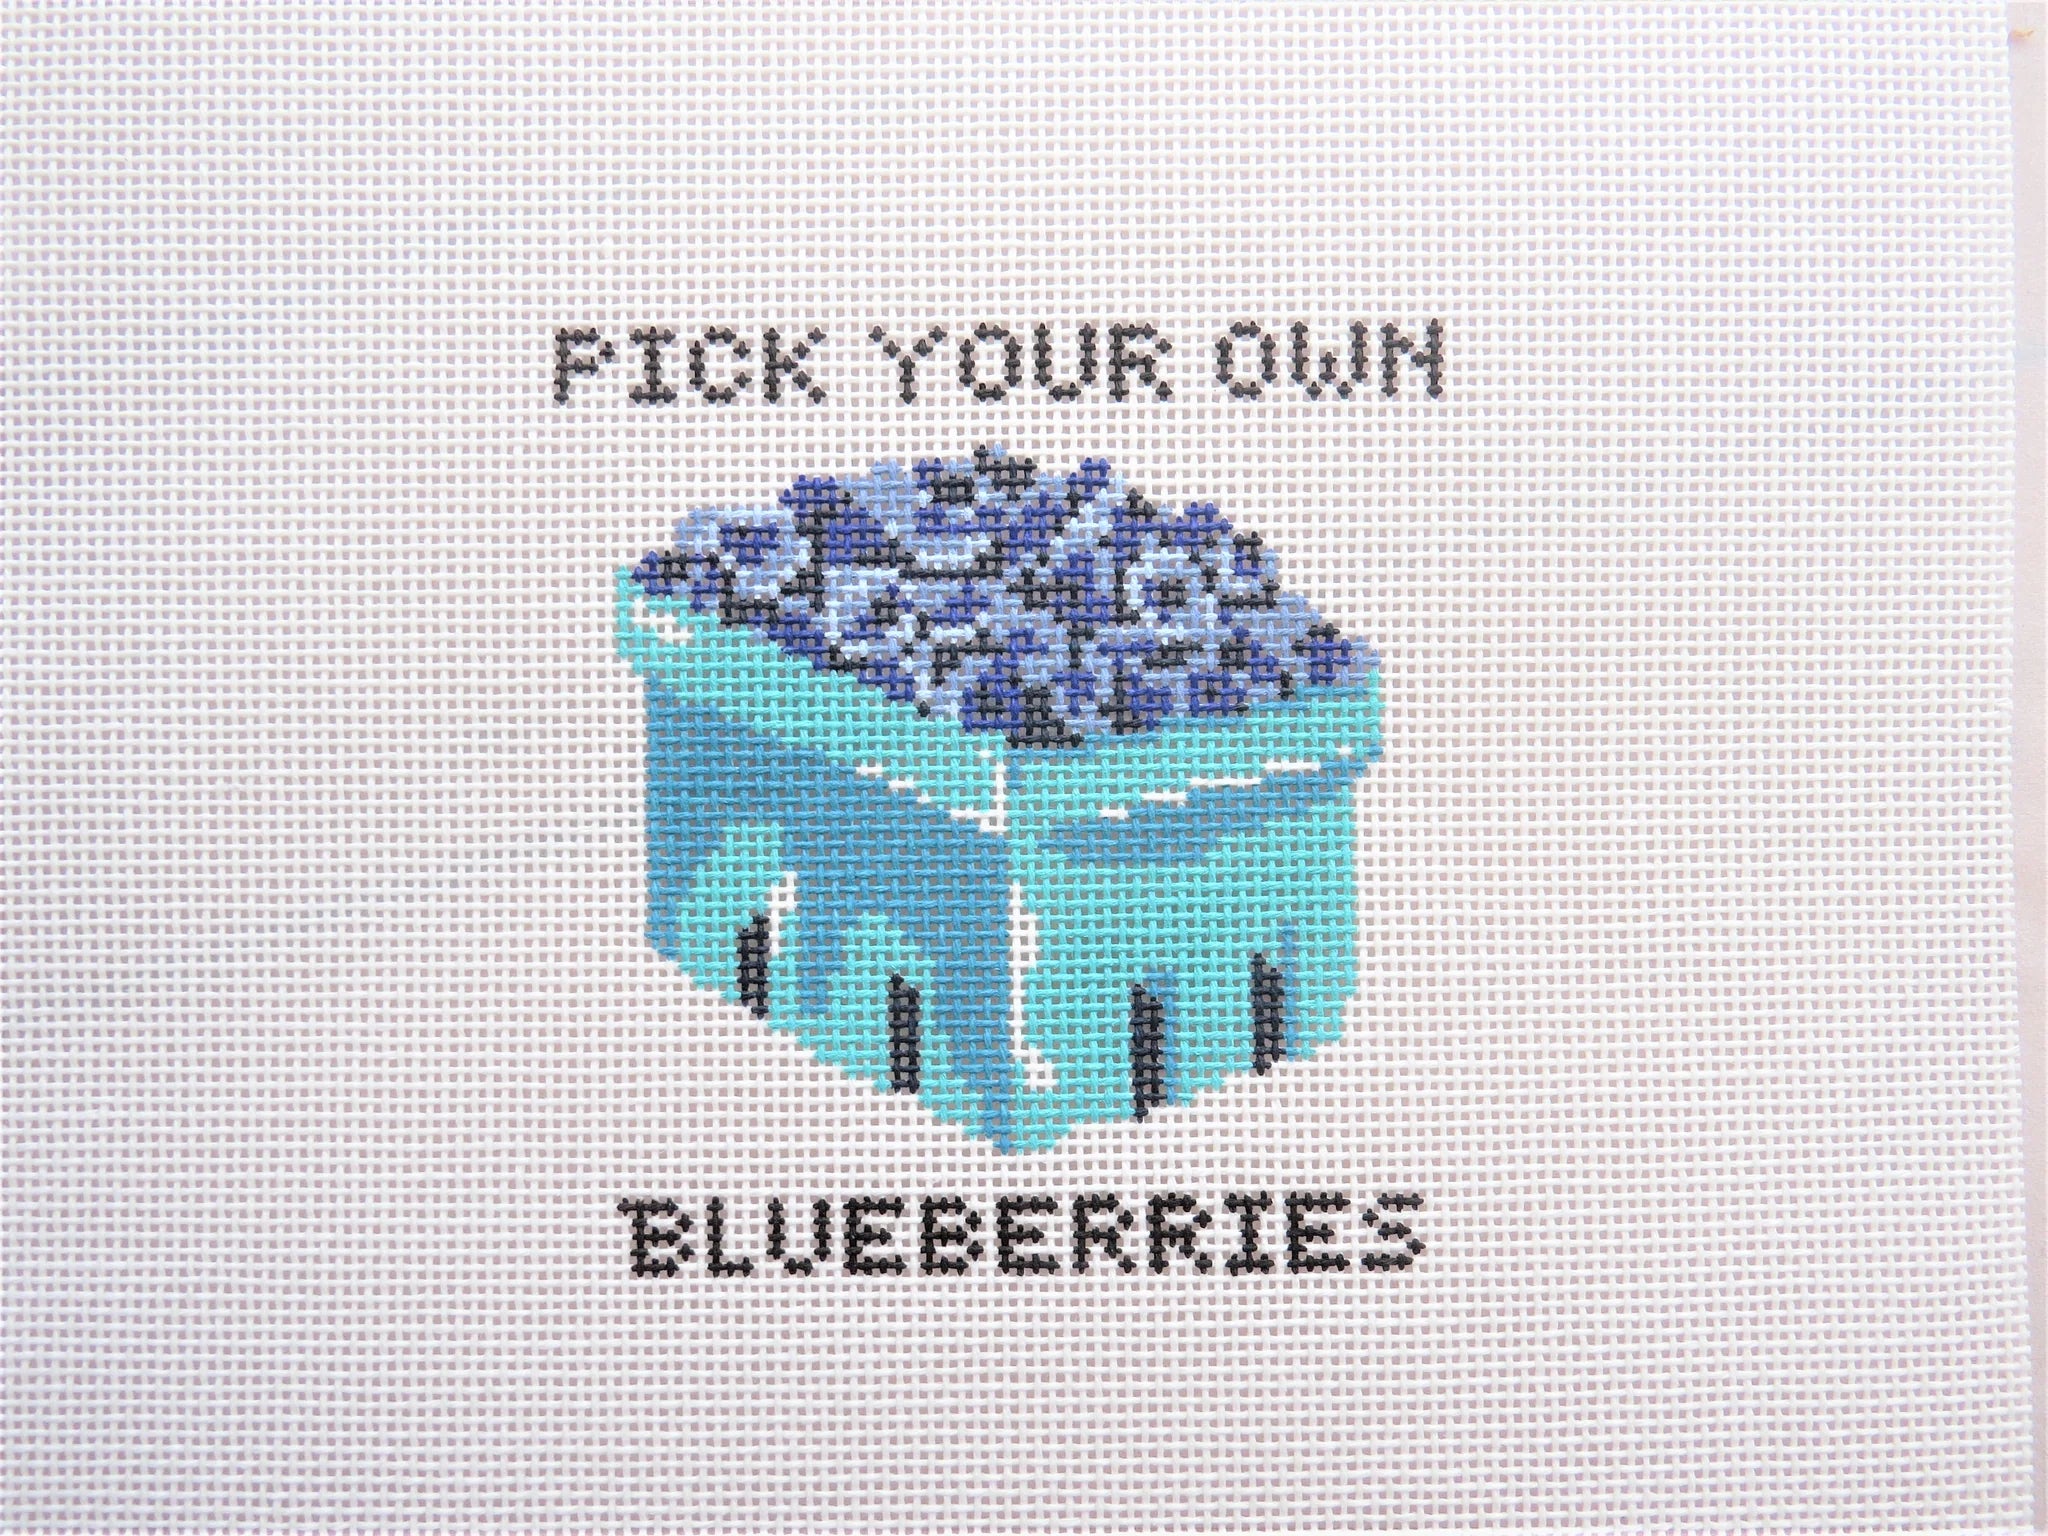 Pick Your Own Blueberries  AB-46